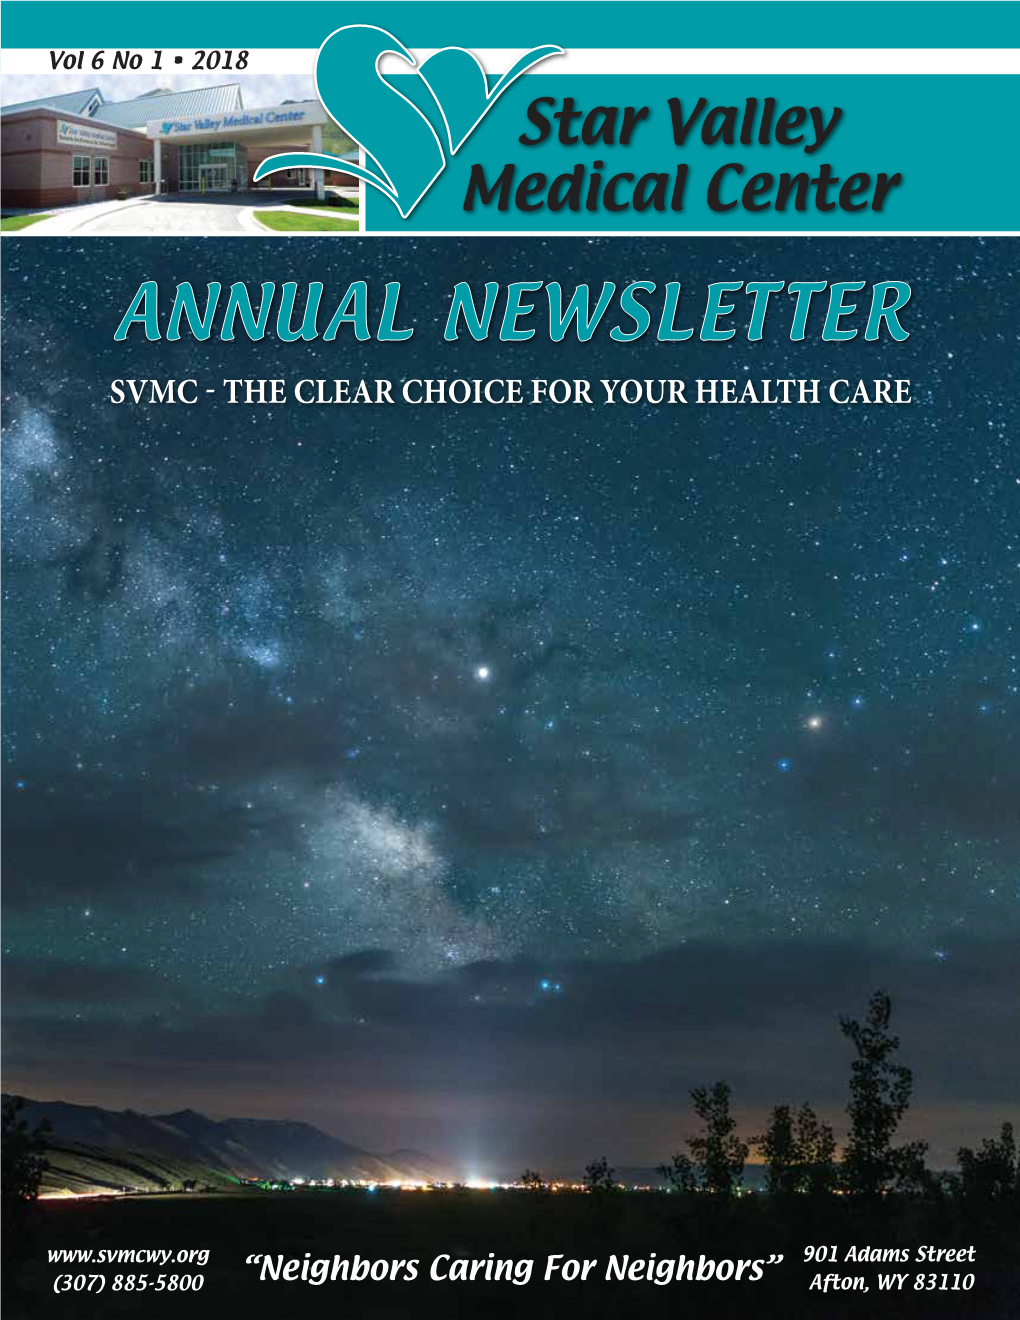 Annual Newsletter Svmc the Clear Choice for Your Health Care